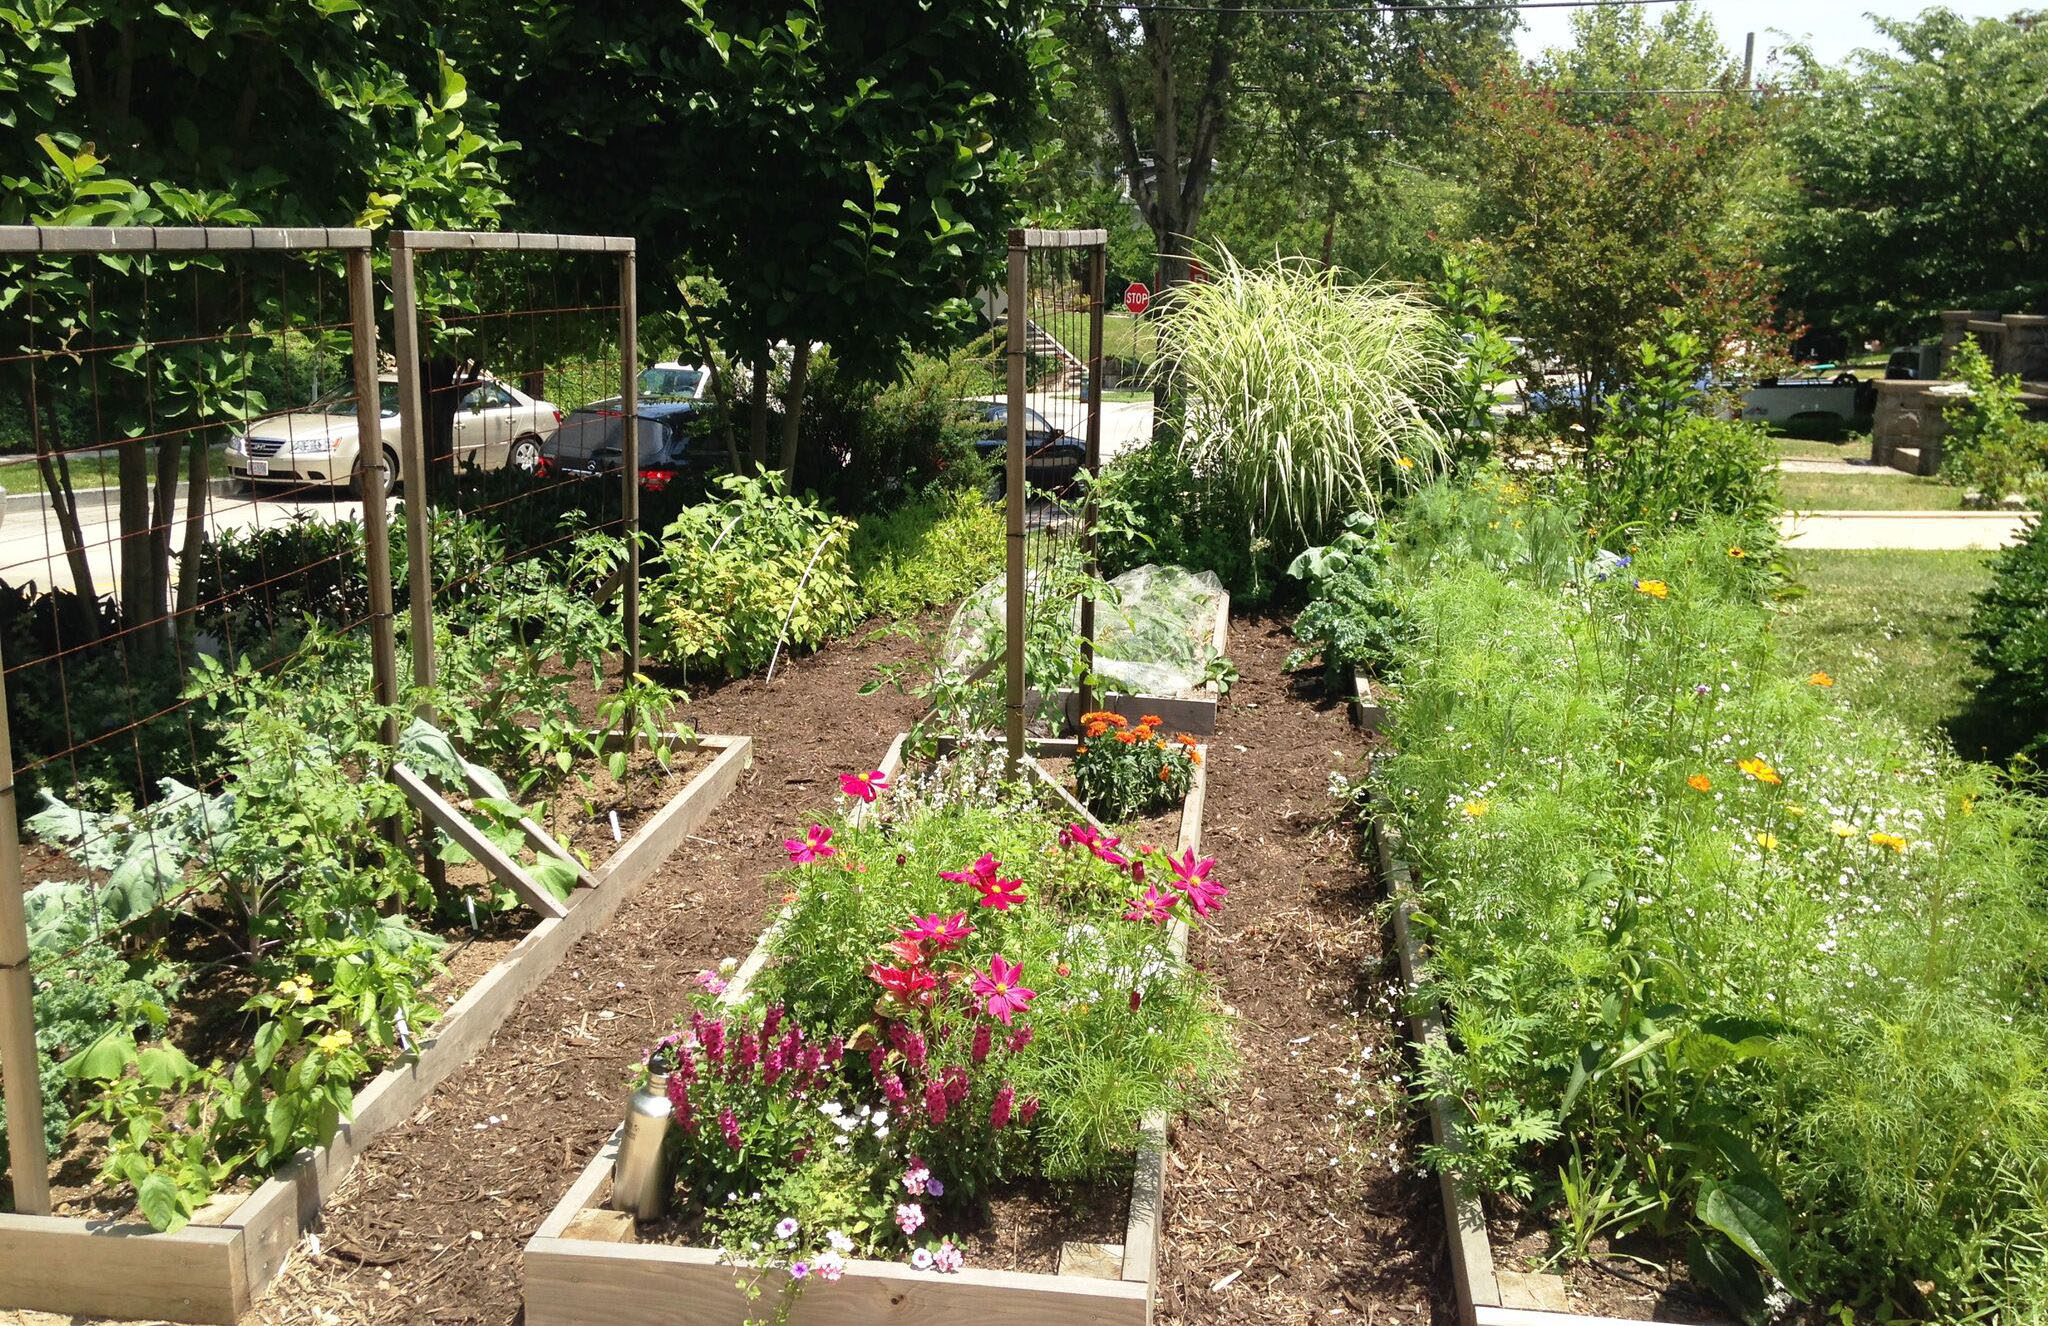 A front yard garden with flowers and trellises